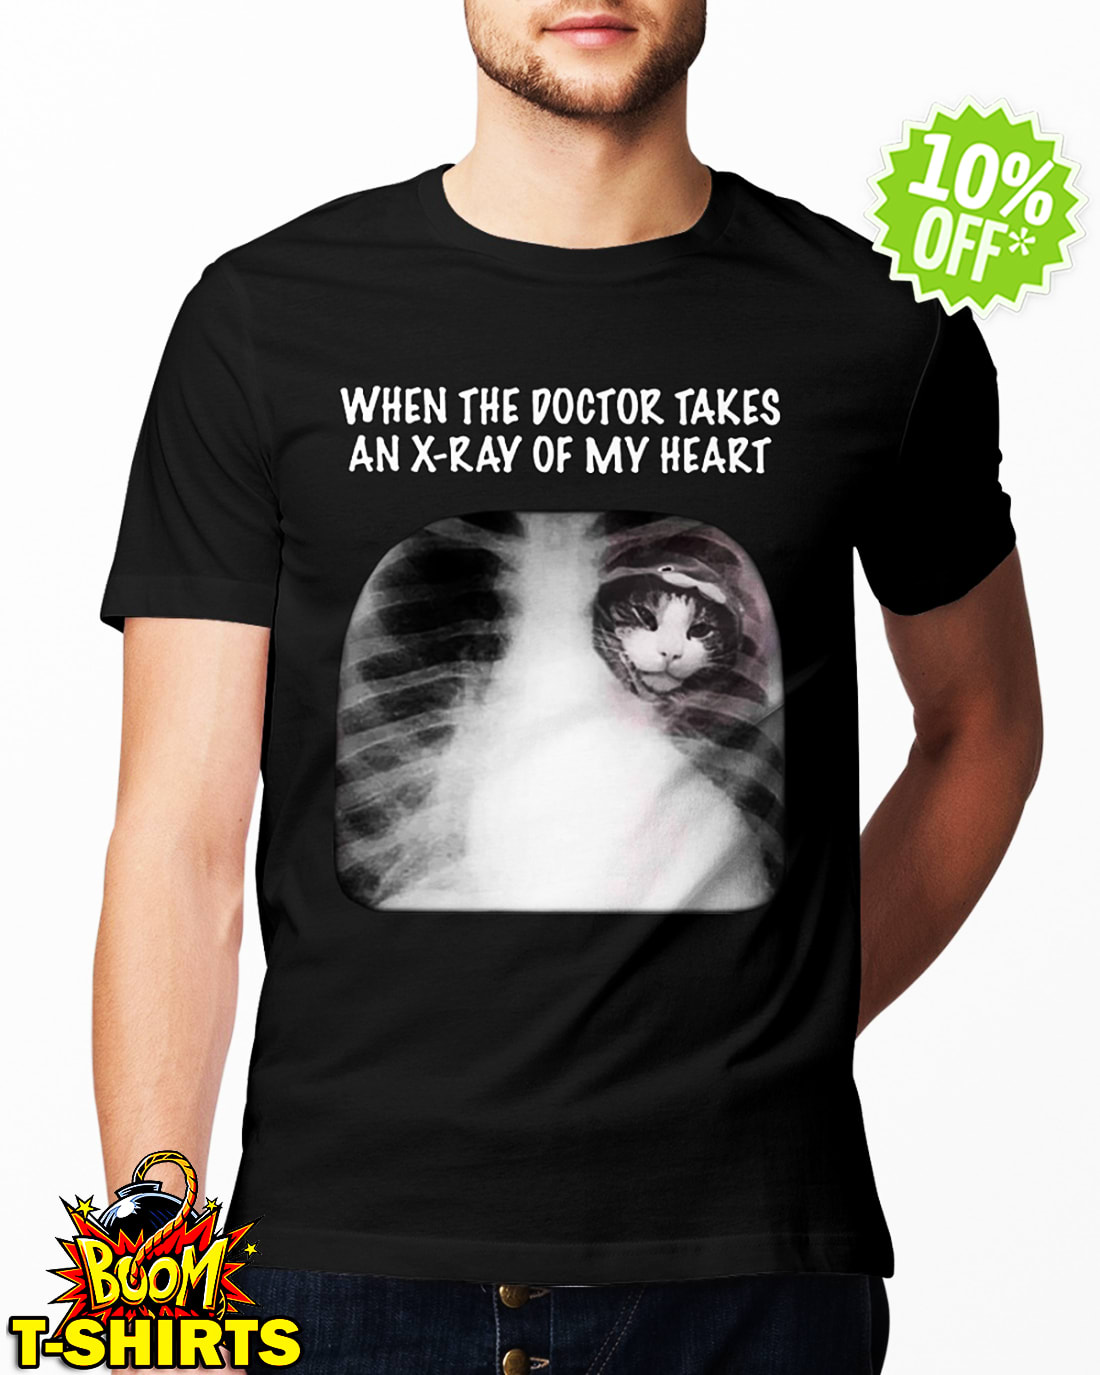 (Best Buy) Cat when the doctor takes an x-ray of my heart shirt, hooded sweatshirt, sleeveless tee